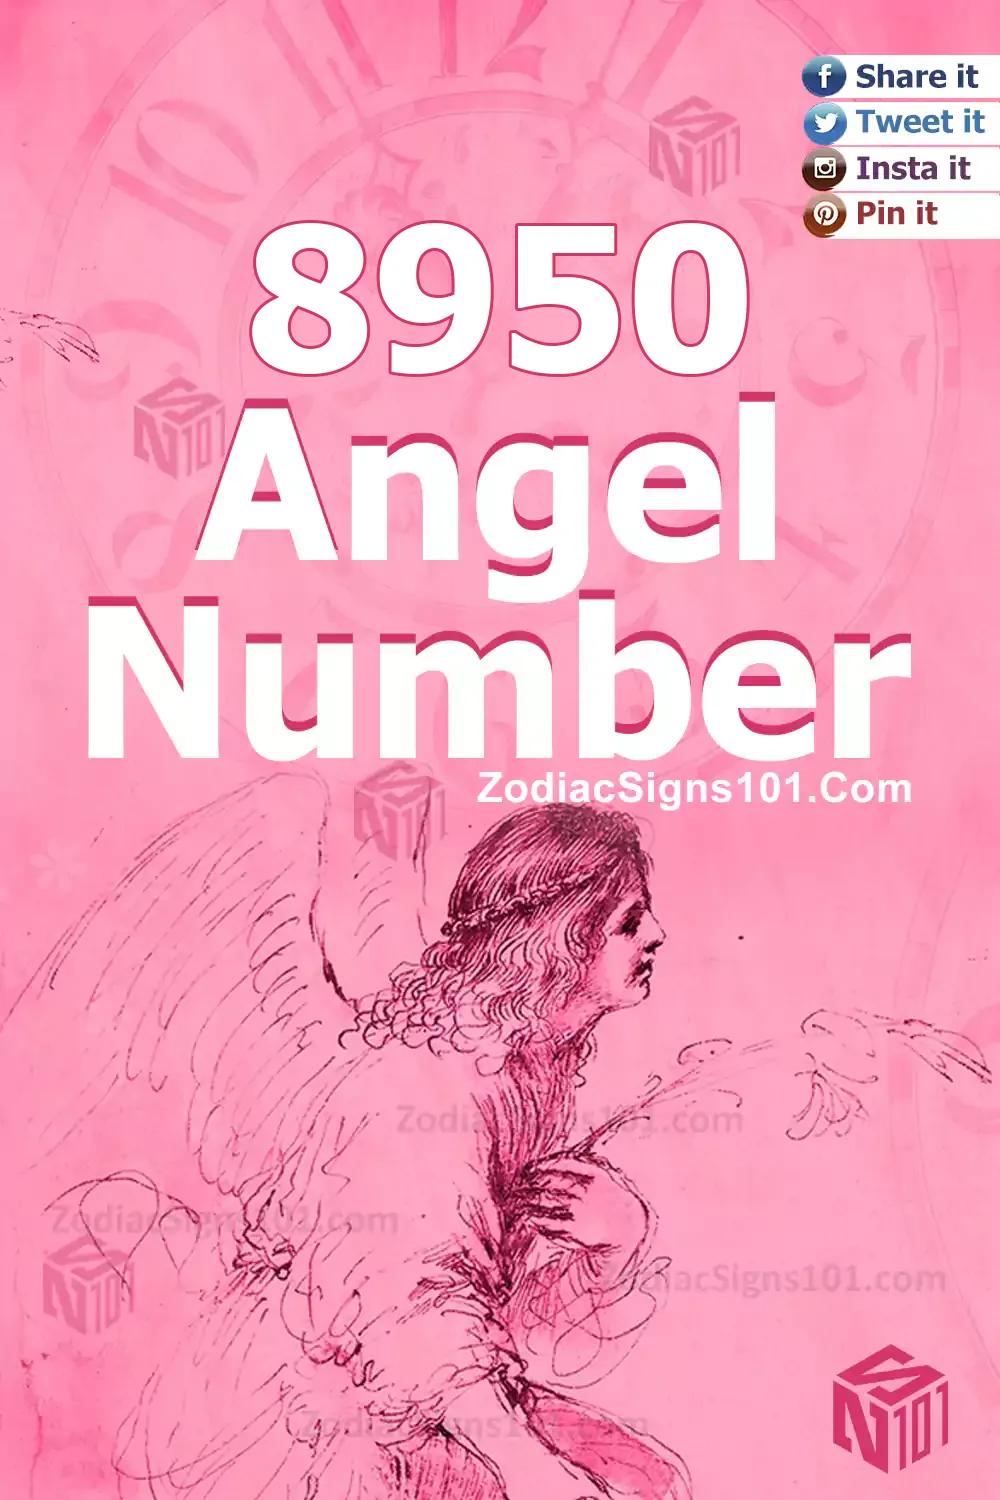 8950 Angel Number Meaning